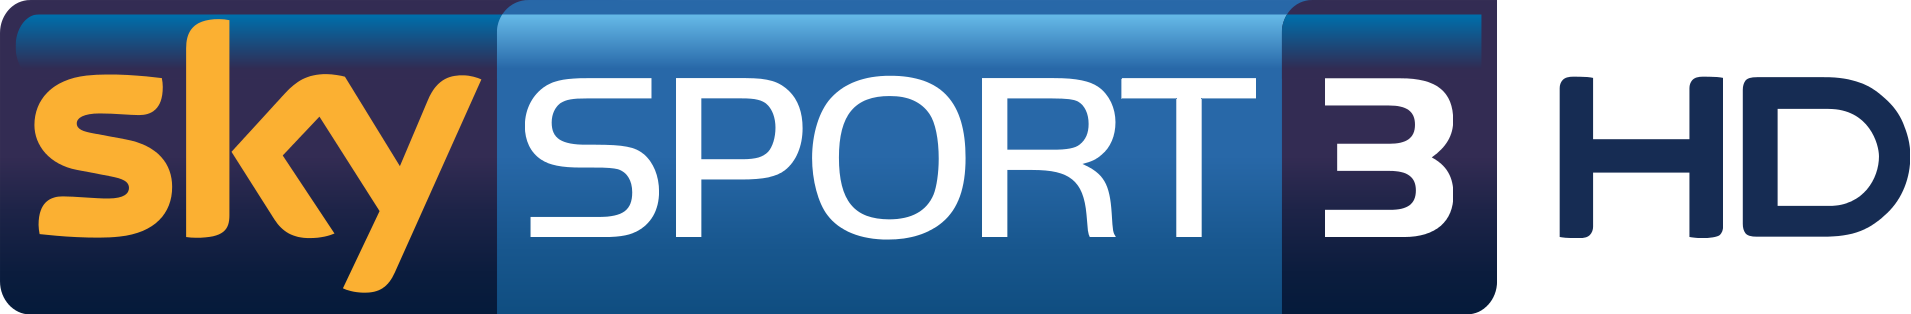 Sky Sport 3 Hd Italy 2010.png - Italy, Transparent background PNG HD thumbnail